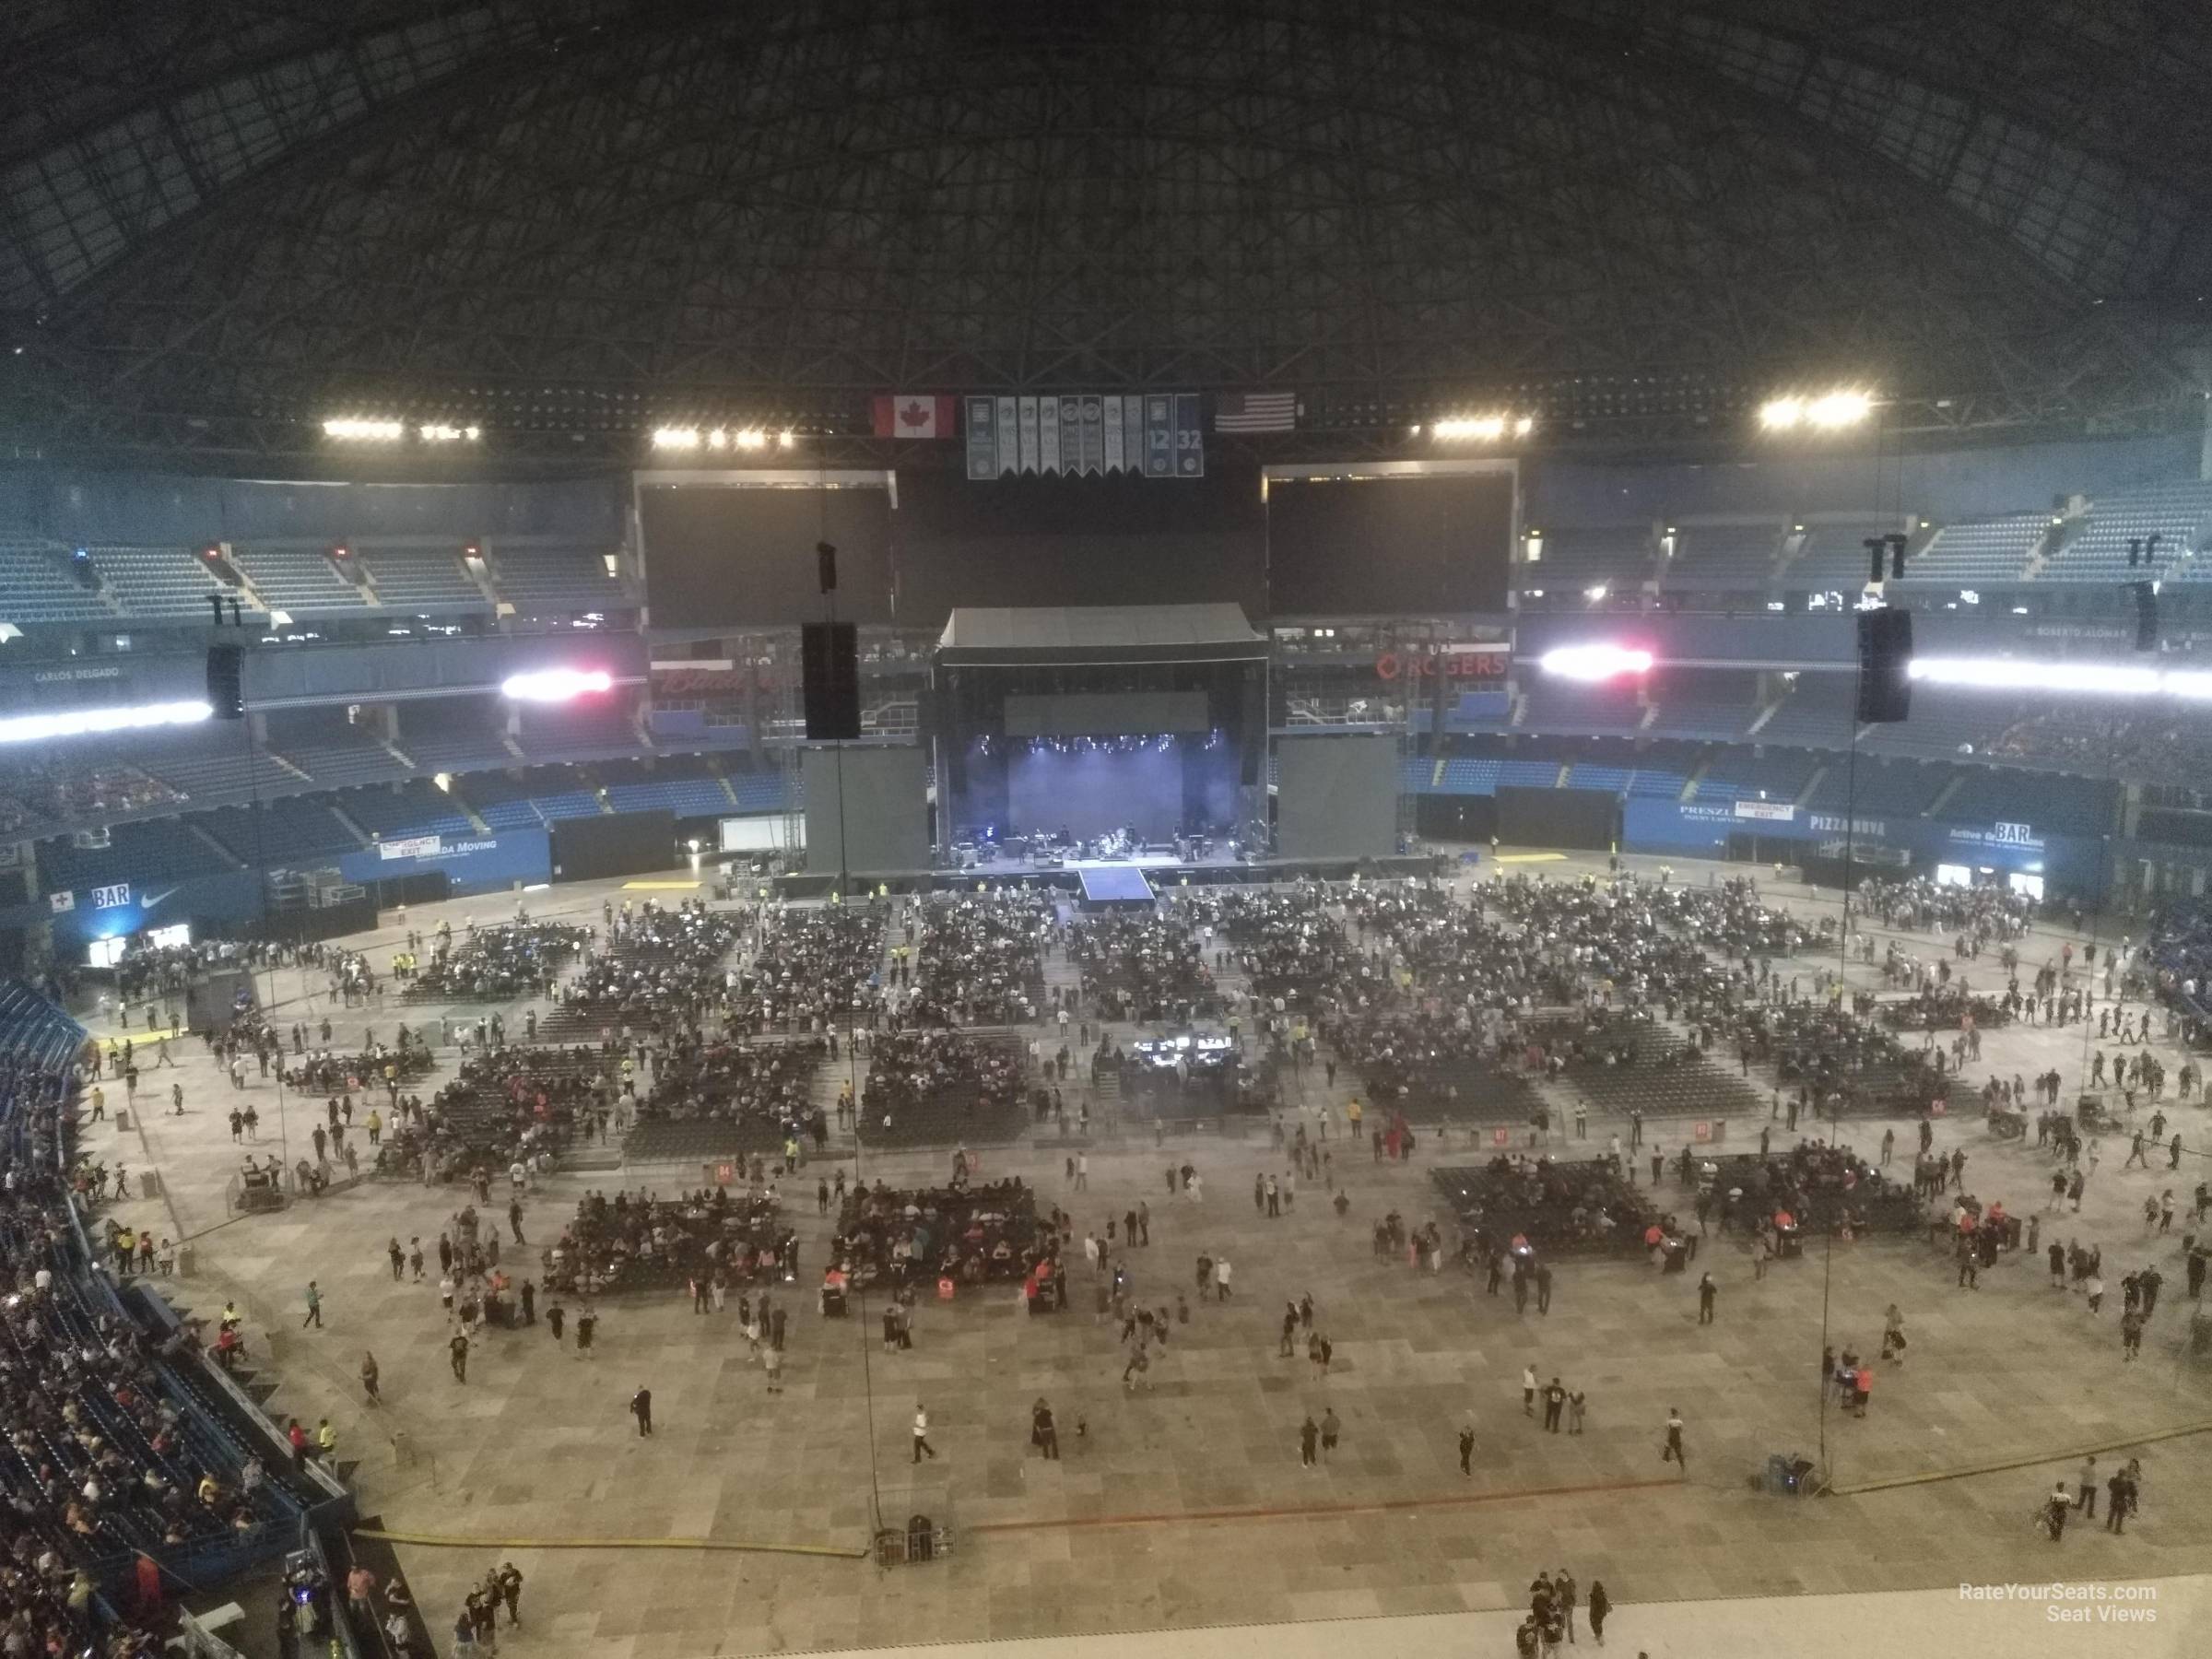 section 524b, row 5 seat view  for concert - rogers centre